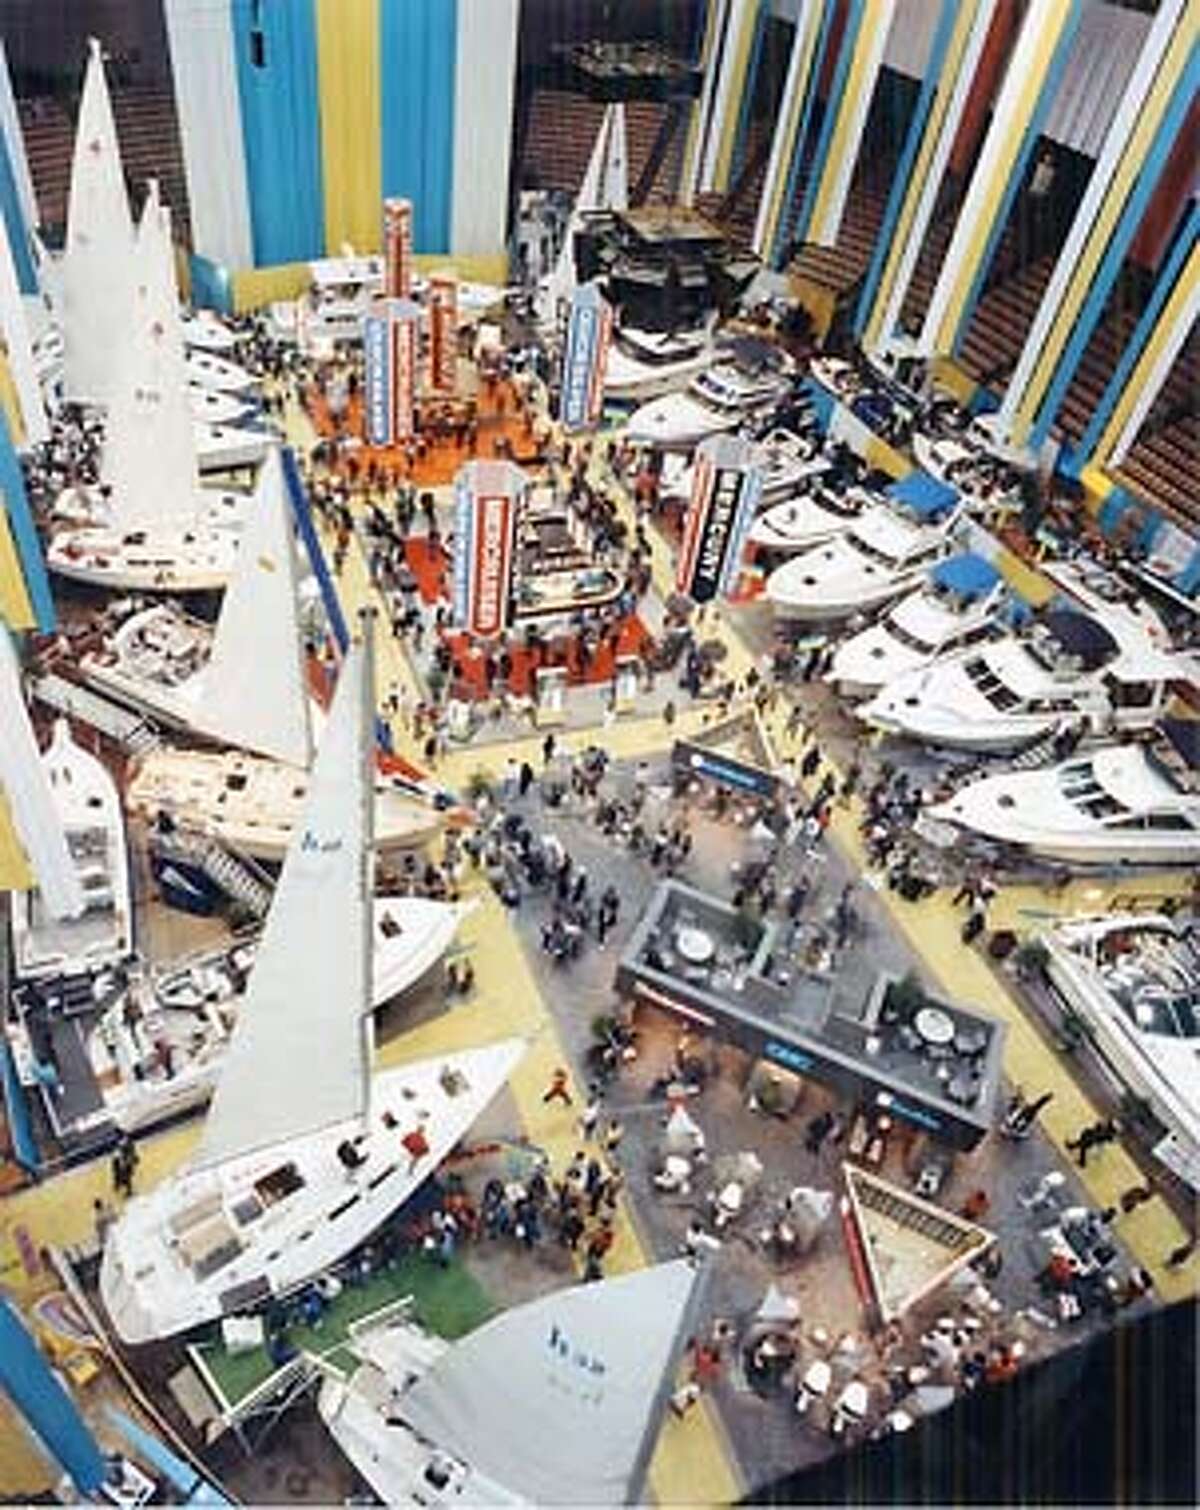 The 59th Annual San Francisco Sport and Boat Show.